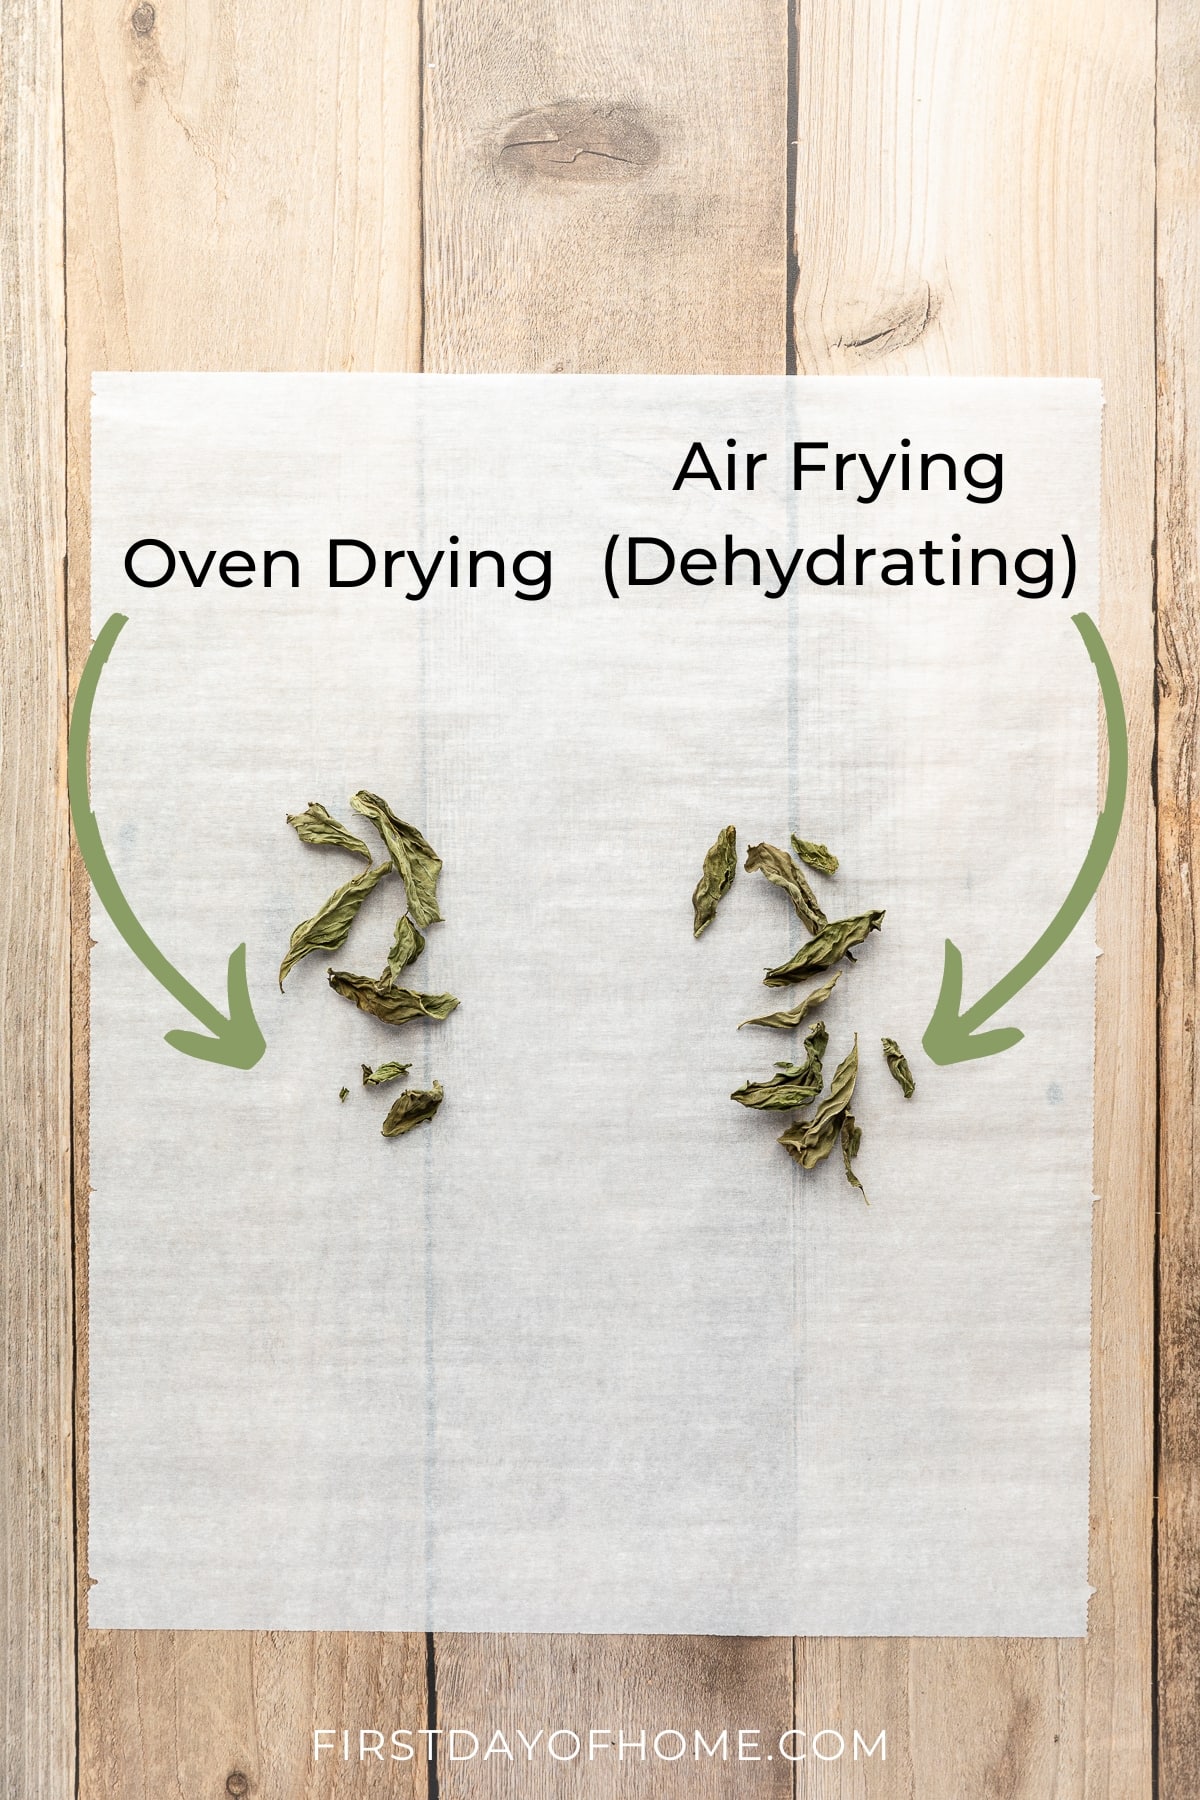 Dried basil from the oven vs an air fryer (dehydrator)